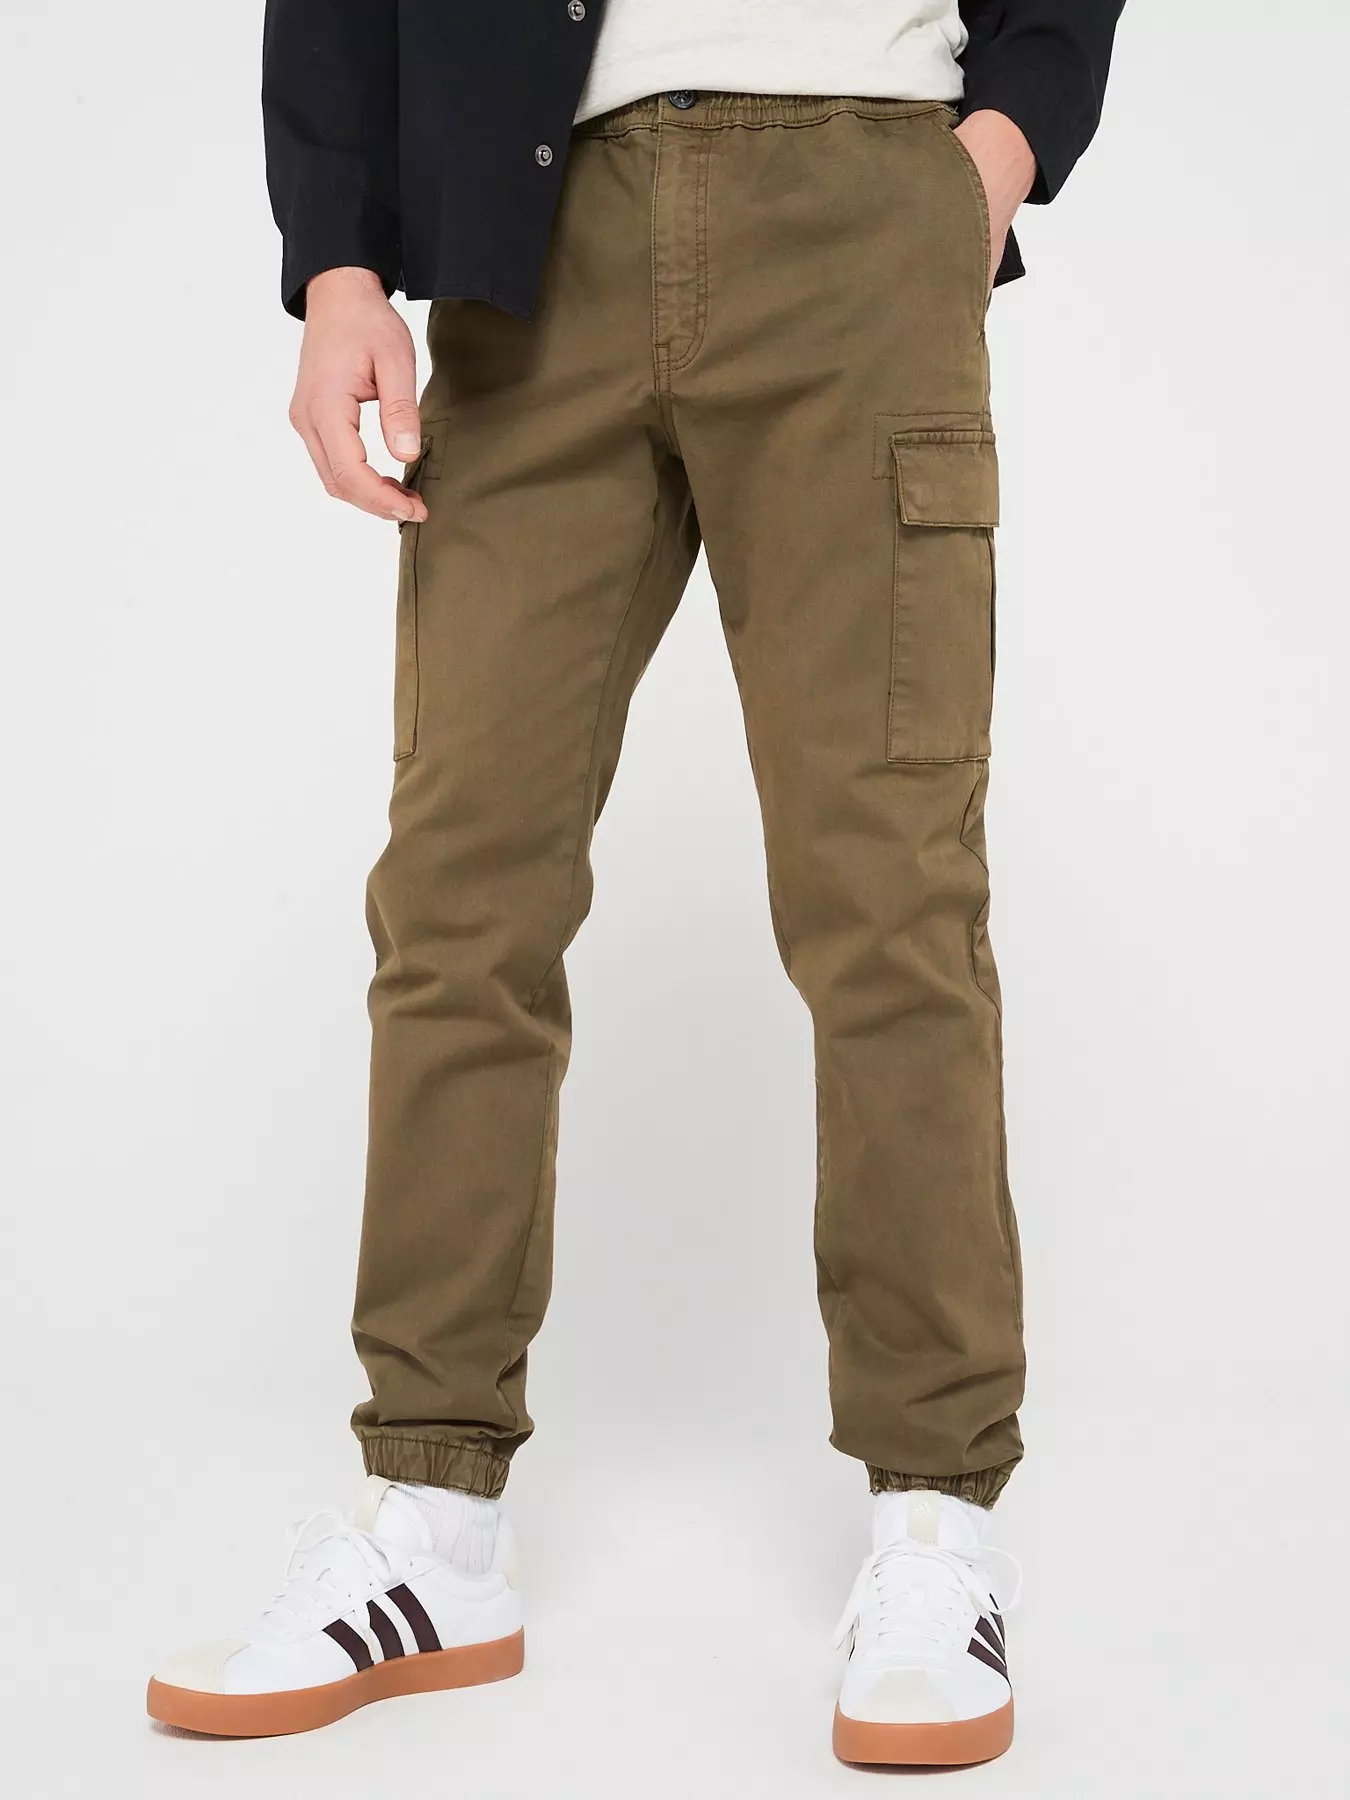 Shop Men's Trousers, Chinos & Joggers